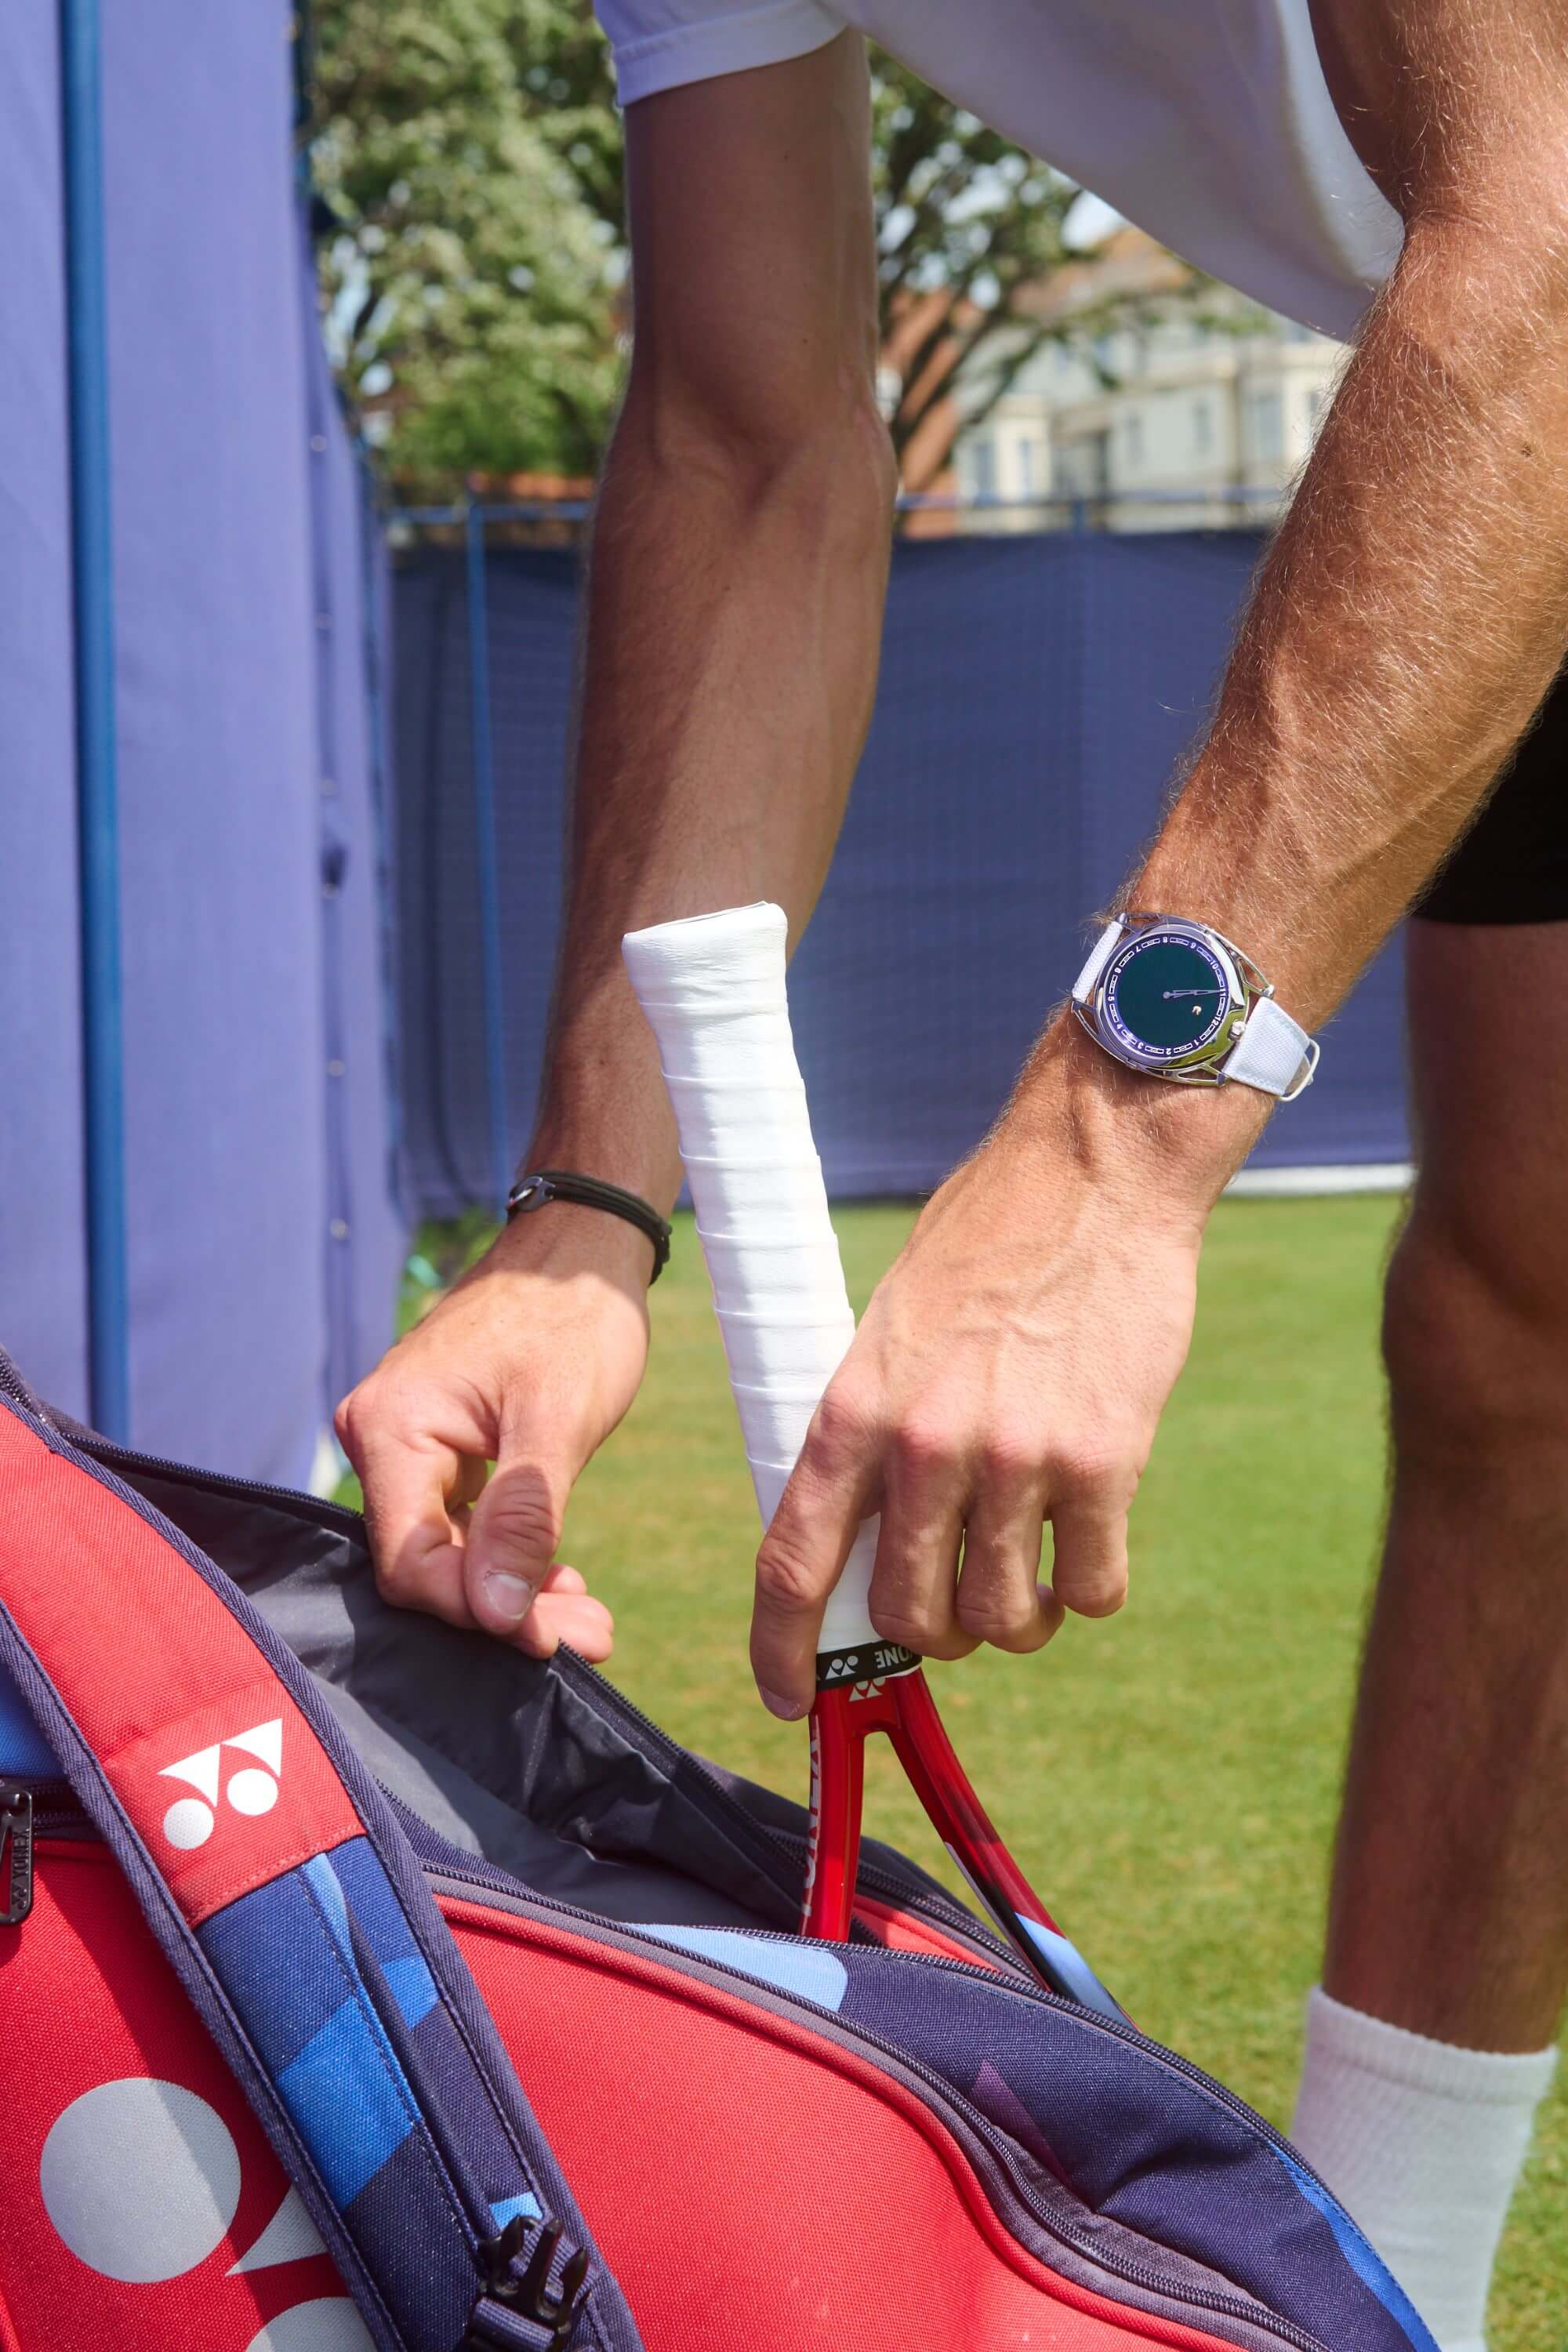 De Bethune is delighted to be supporting talented tennis player Tommy Paul on the first day of Wimbledon!